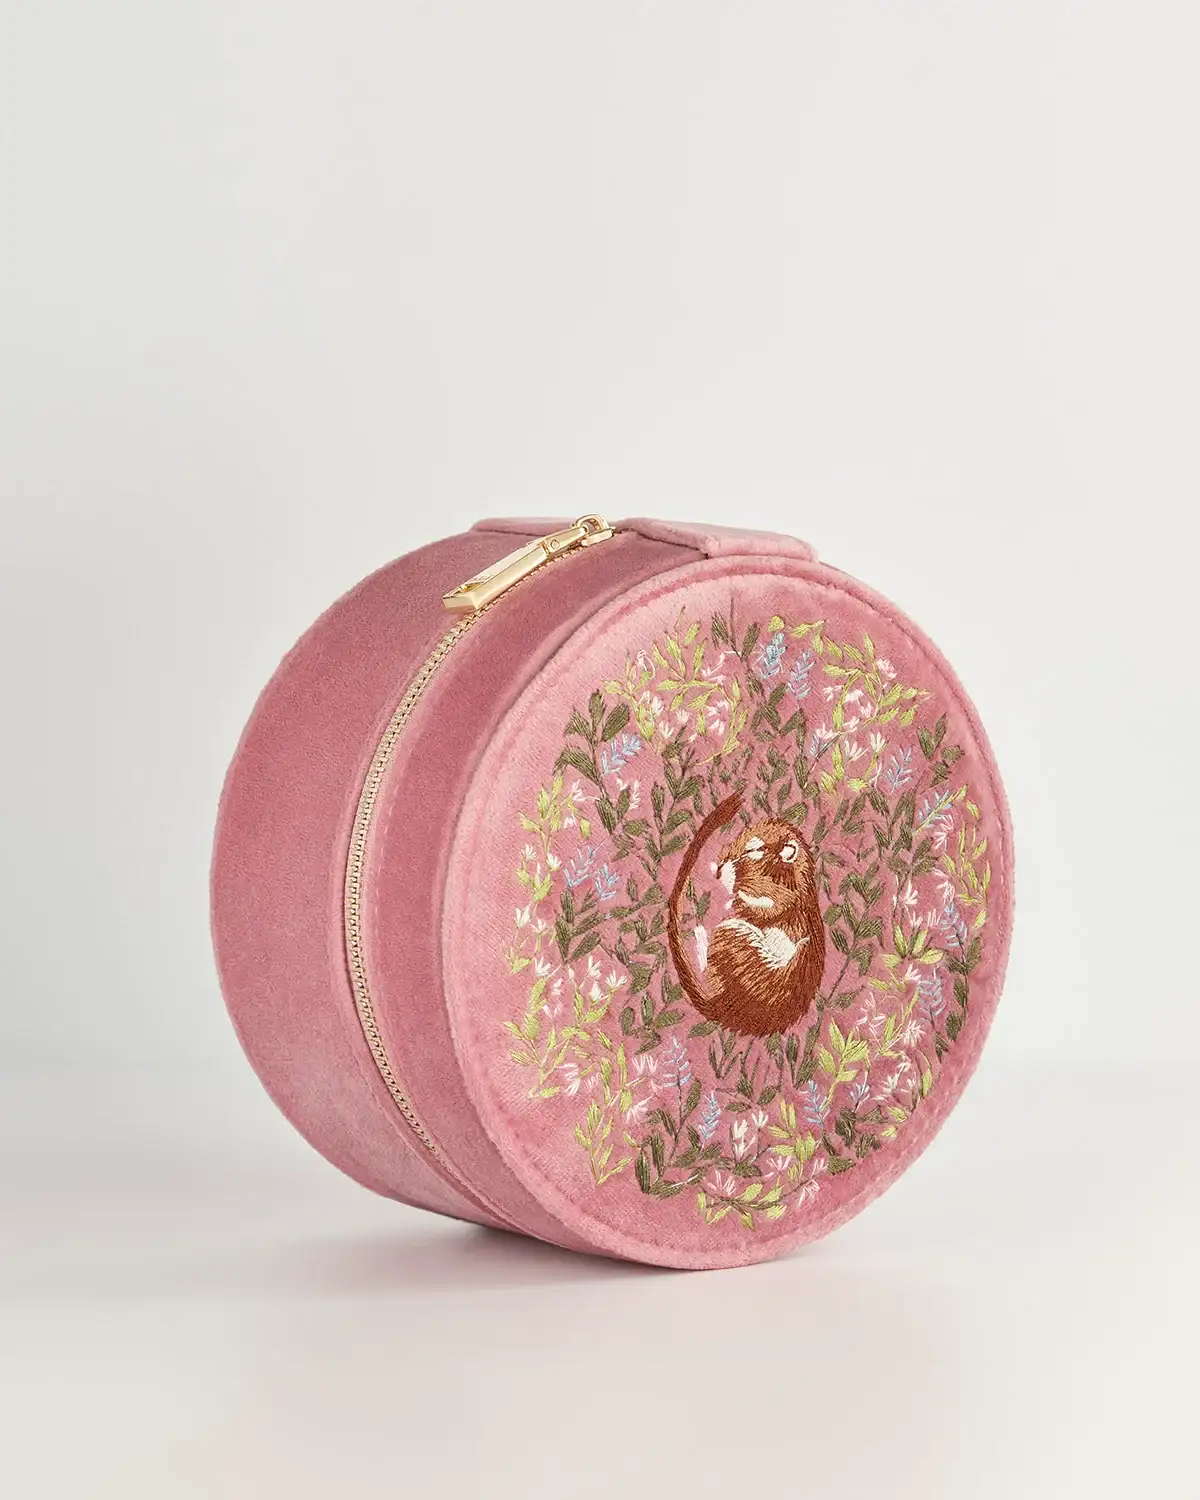 Image of Fable Chloe Dormouse Jewellery box Pink